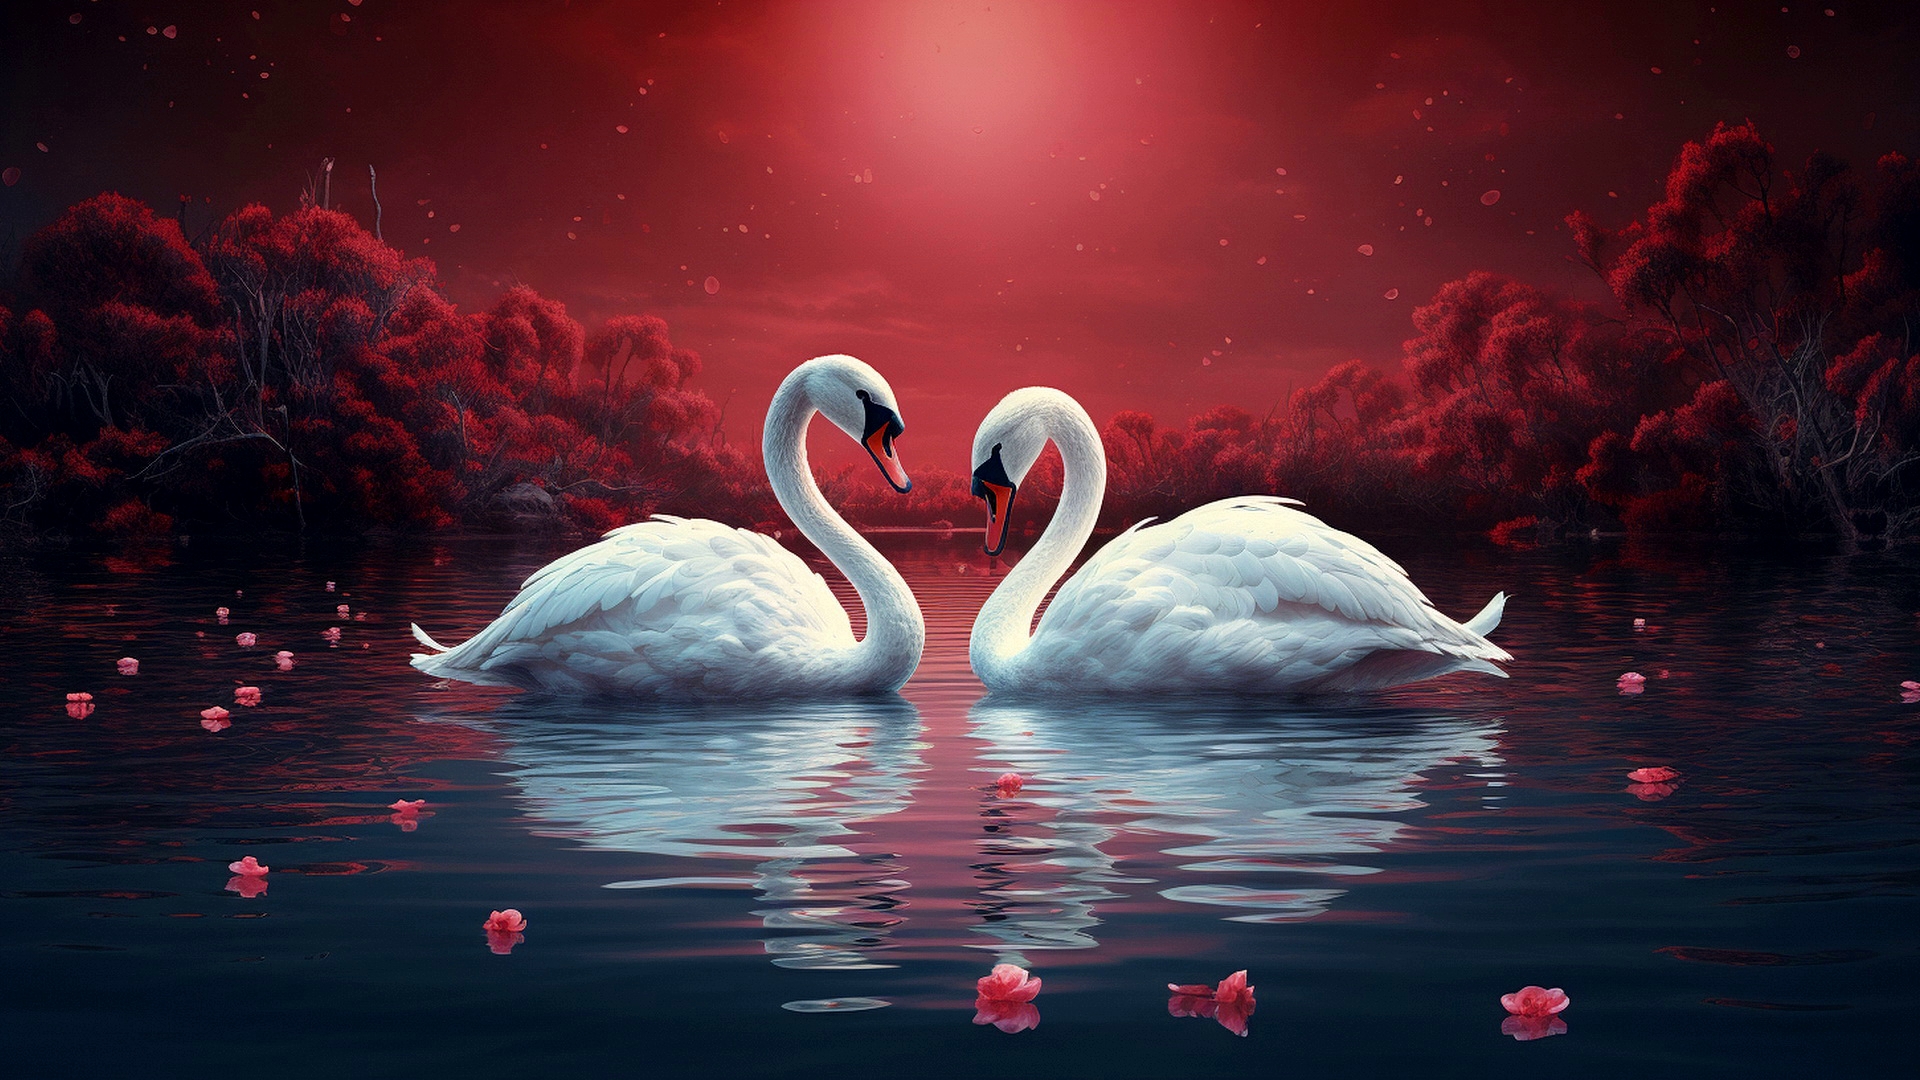 Two swans on the water at night